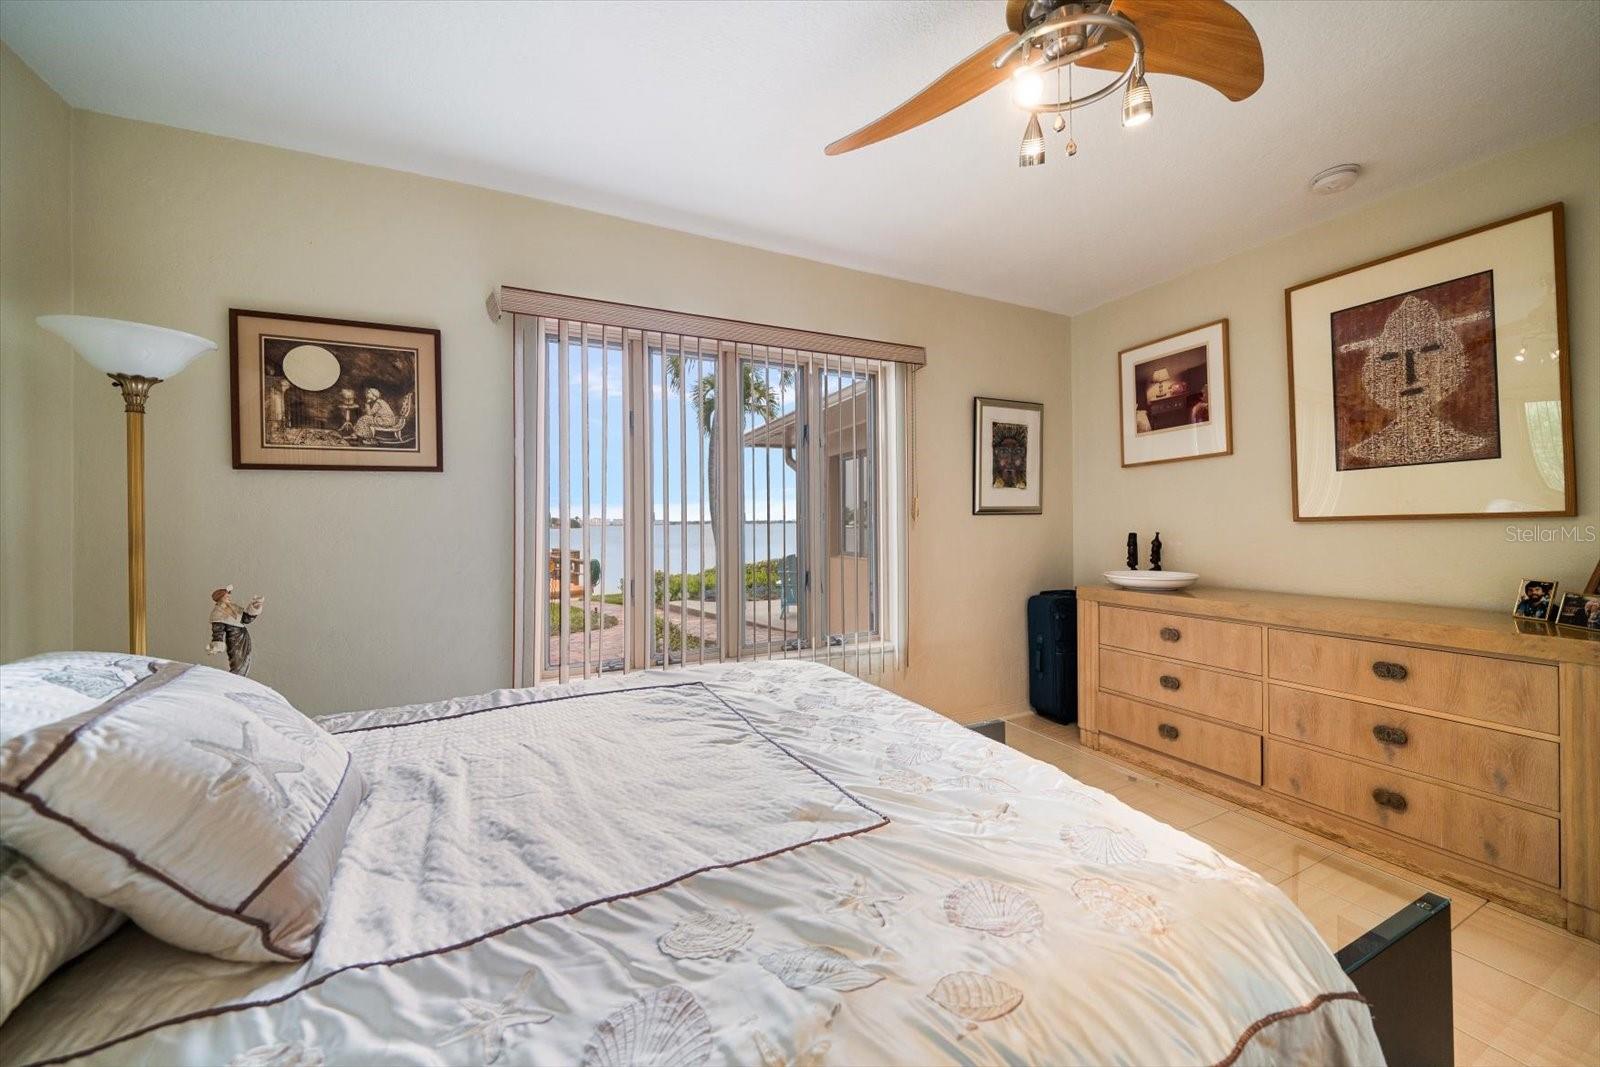 Guest bedroom overlooks yard and waterfront.